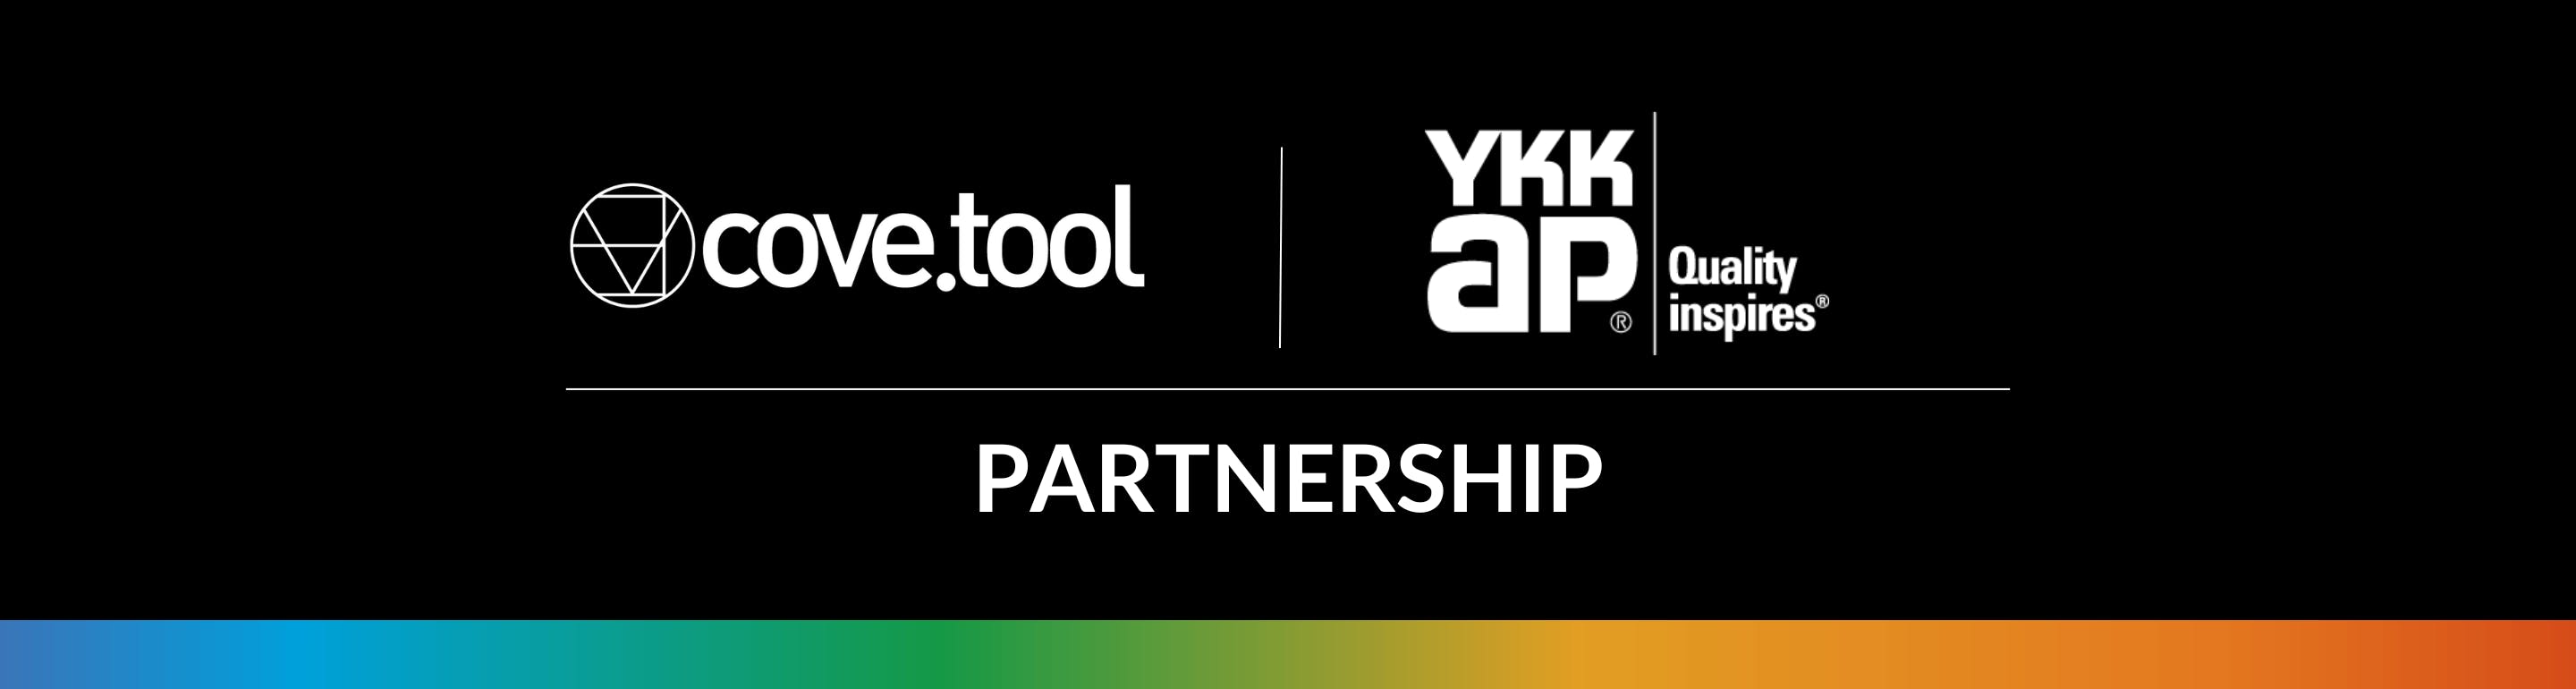 cove.tool and YKK AP Join Forces through revgen.tool